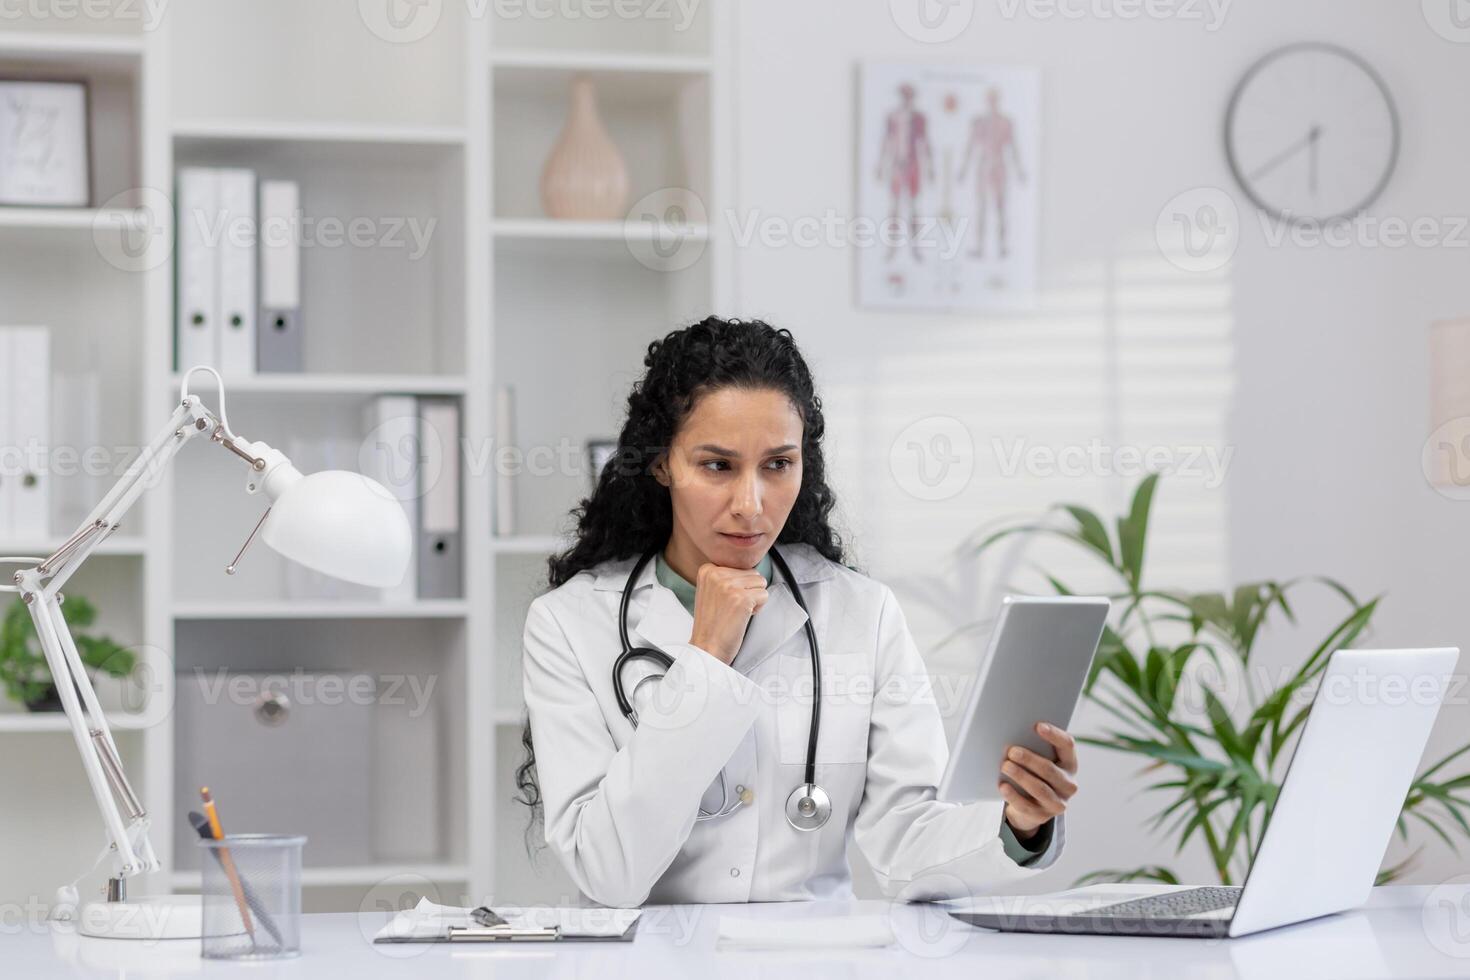 Focused female doctor in a white coat sitting at her office desk, examining medical information on a tablet with a laptop nearby in a well-lit clinic. photo